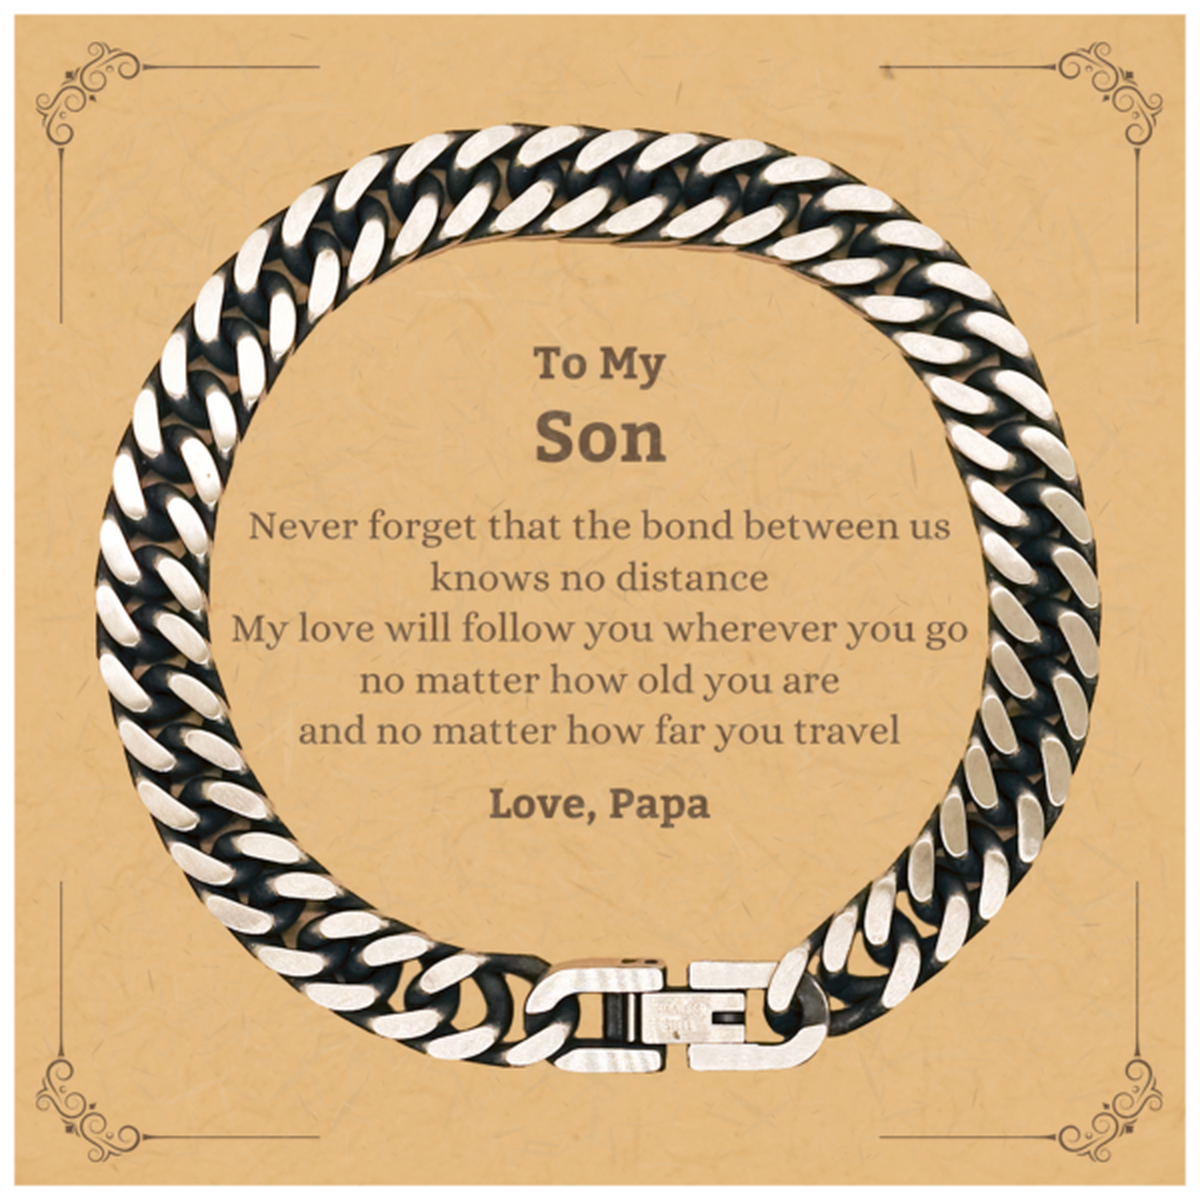 Son Birthday Gifts from Papa, Adjustable Cuban Link Chain Bracelet for Son Christmas Graduation Unique Gifts Son Never forget that the bond between us knows no distance. Love, Papa